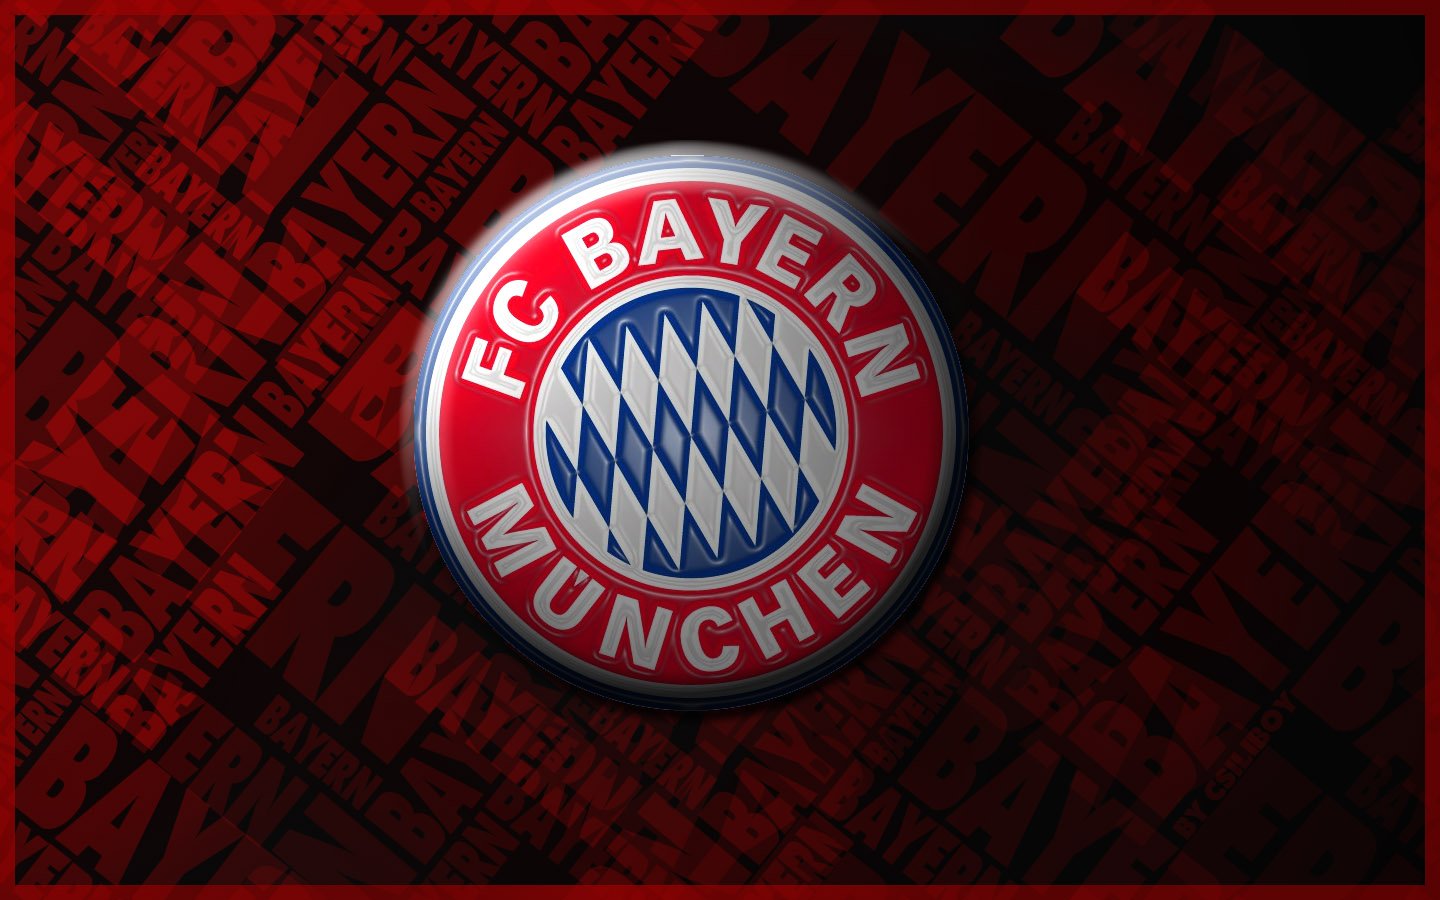 These are the records Bayern Munich have broken this season